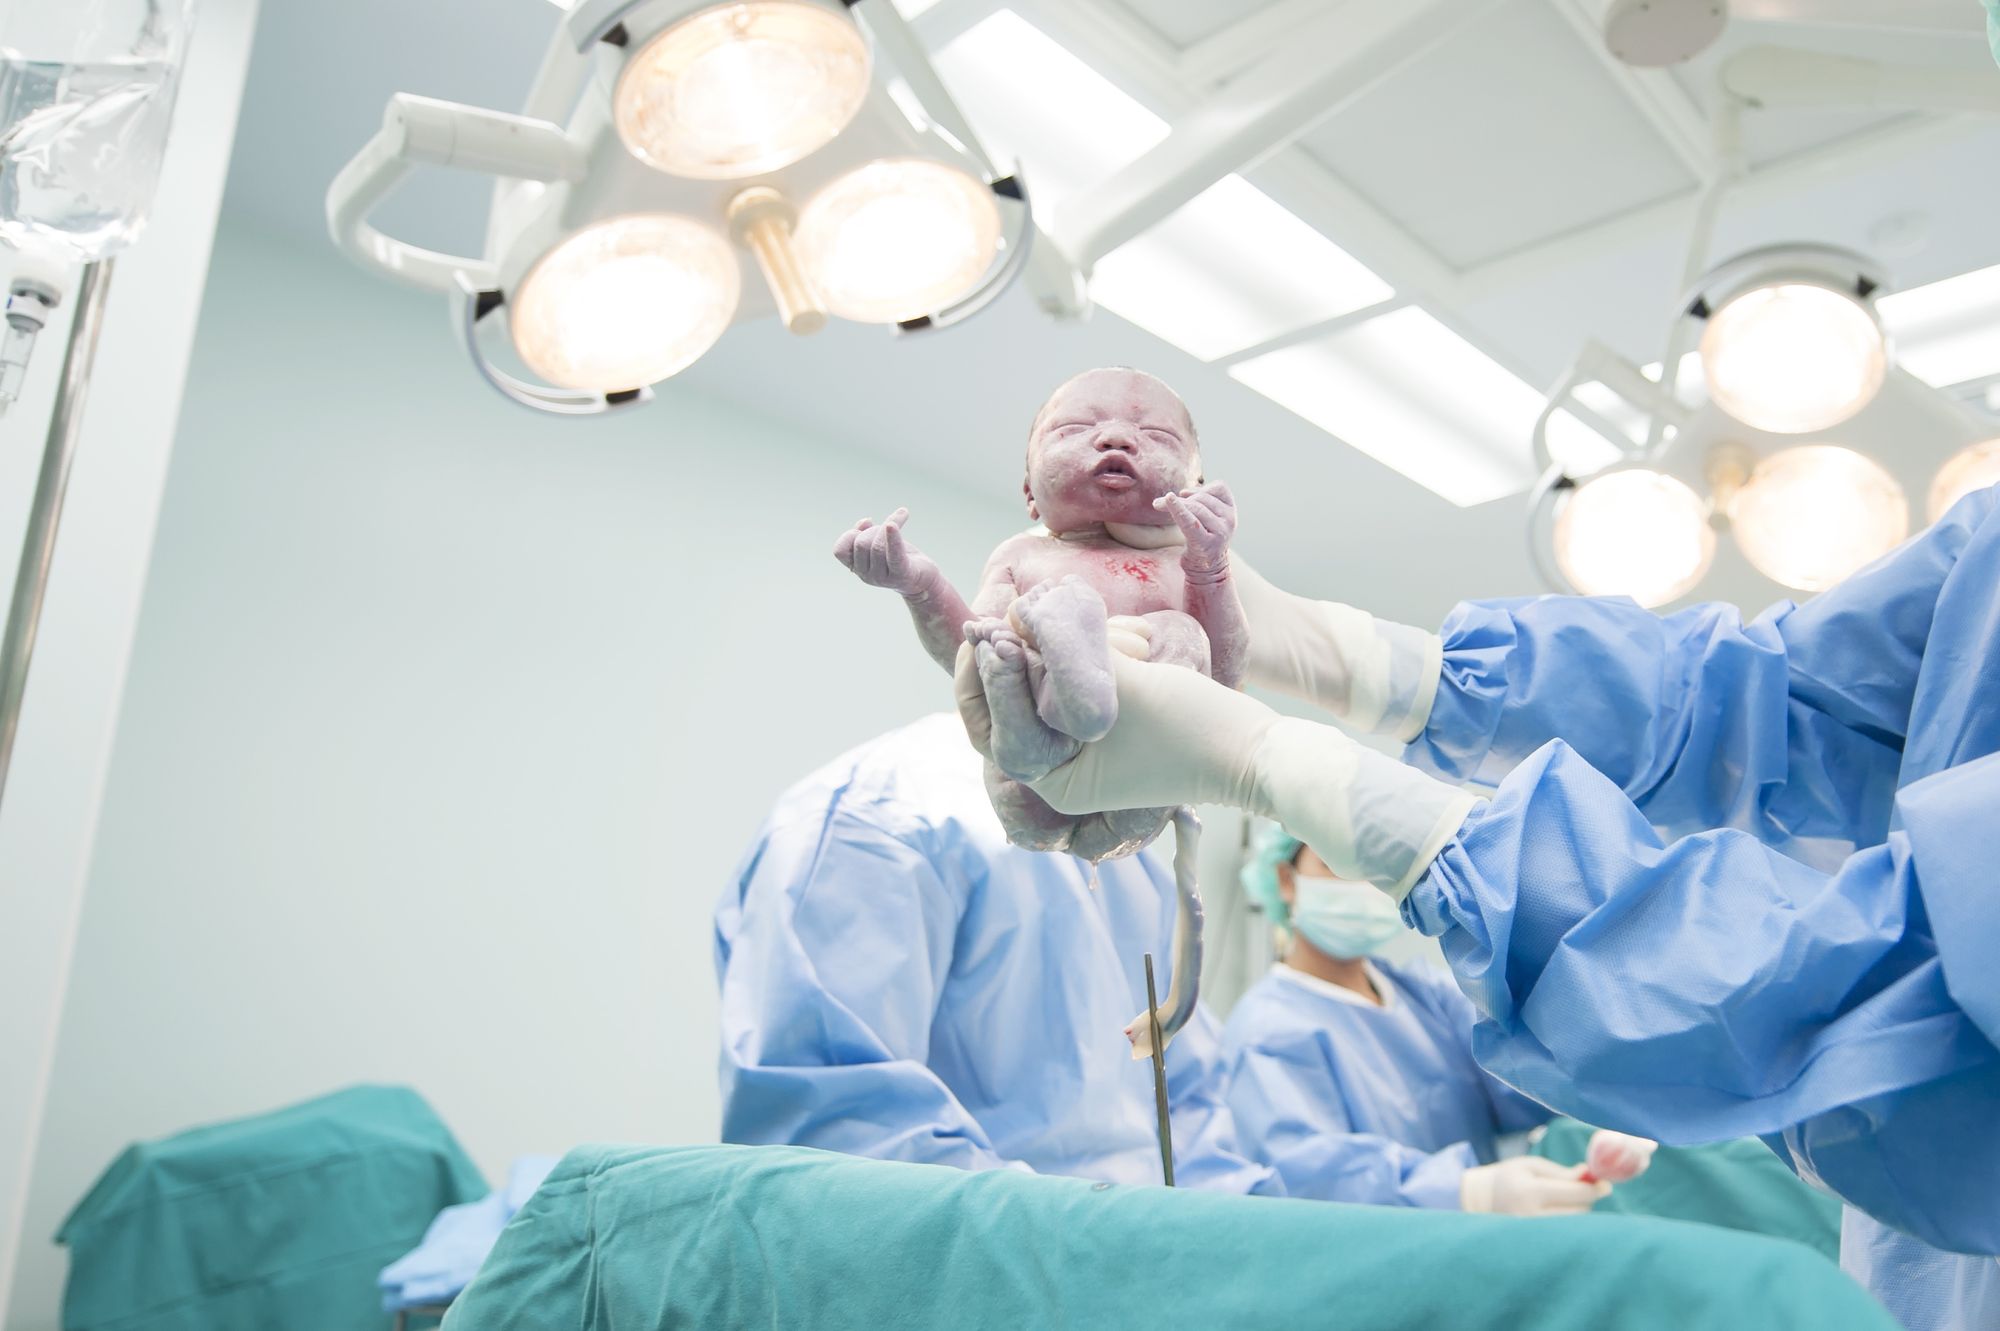 Medical Team Performing A C-Section by SweetLeMontea | www.shutterstock.com